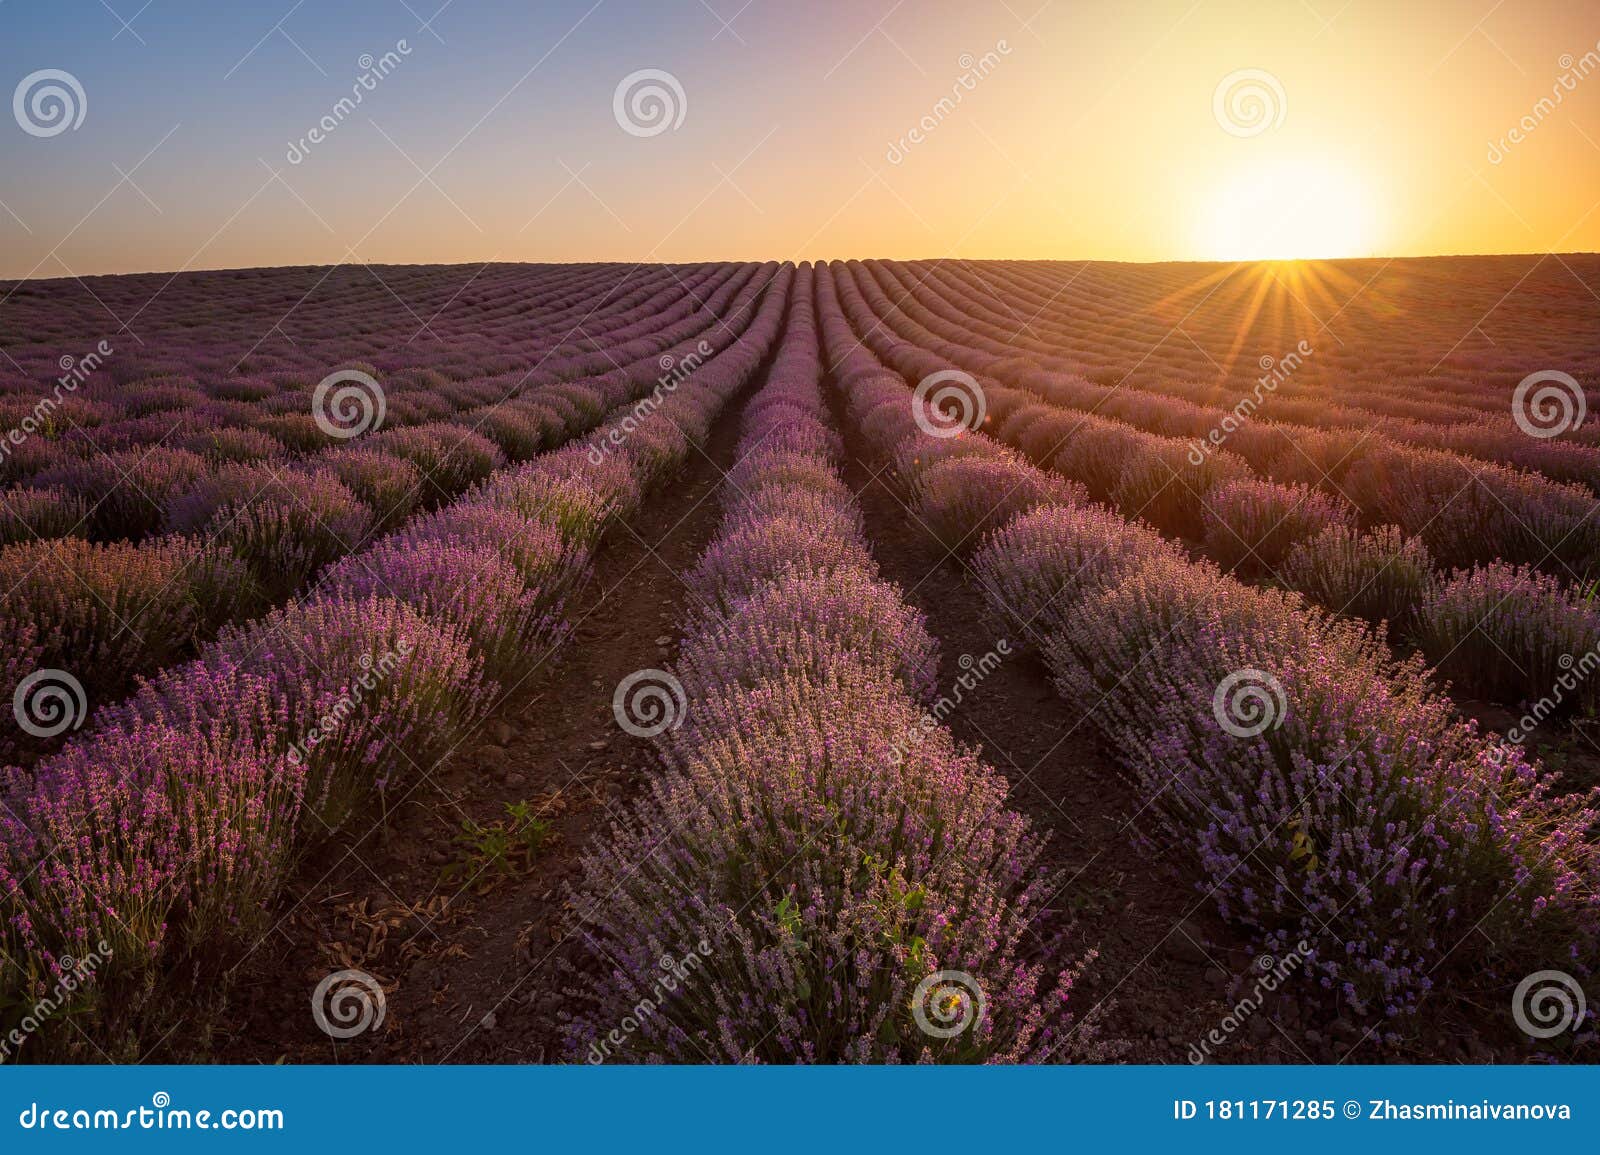 Lavender field at sunset stock image. Image of bloom - 181171285